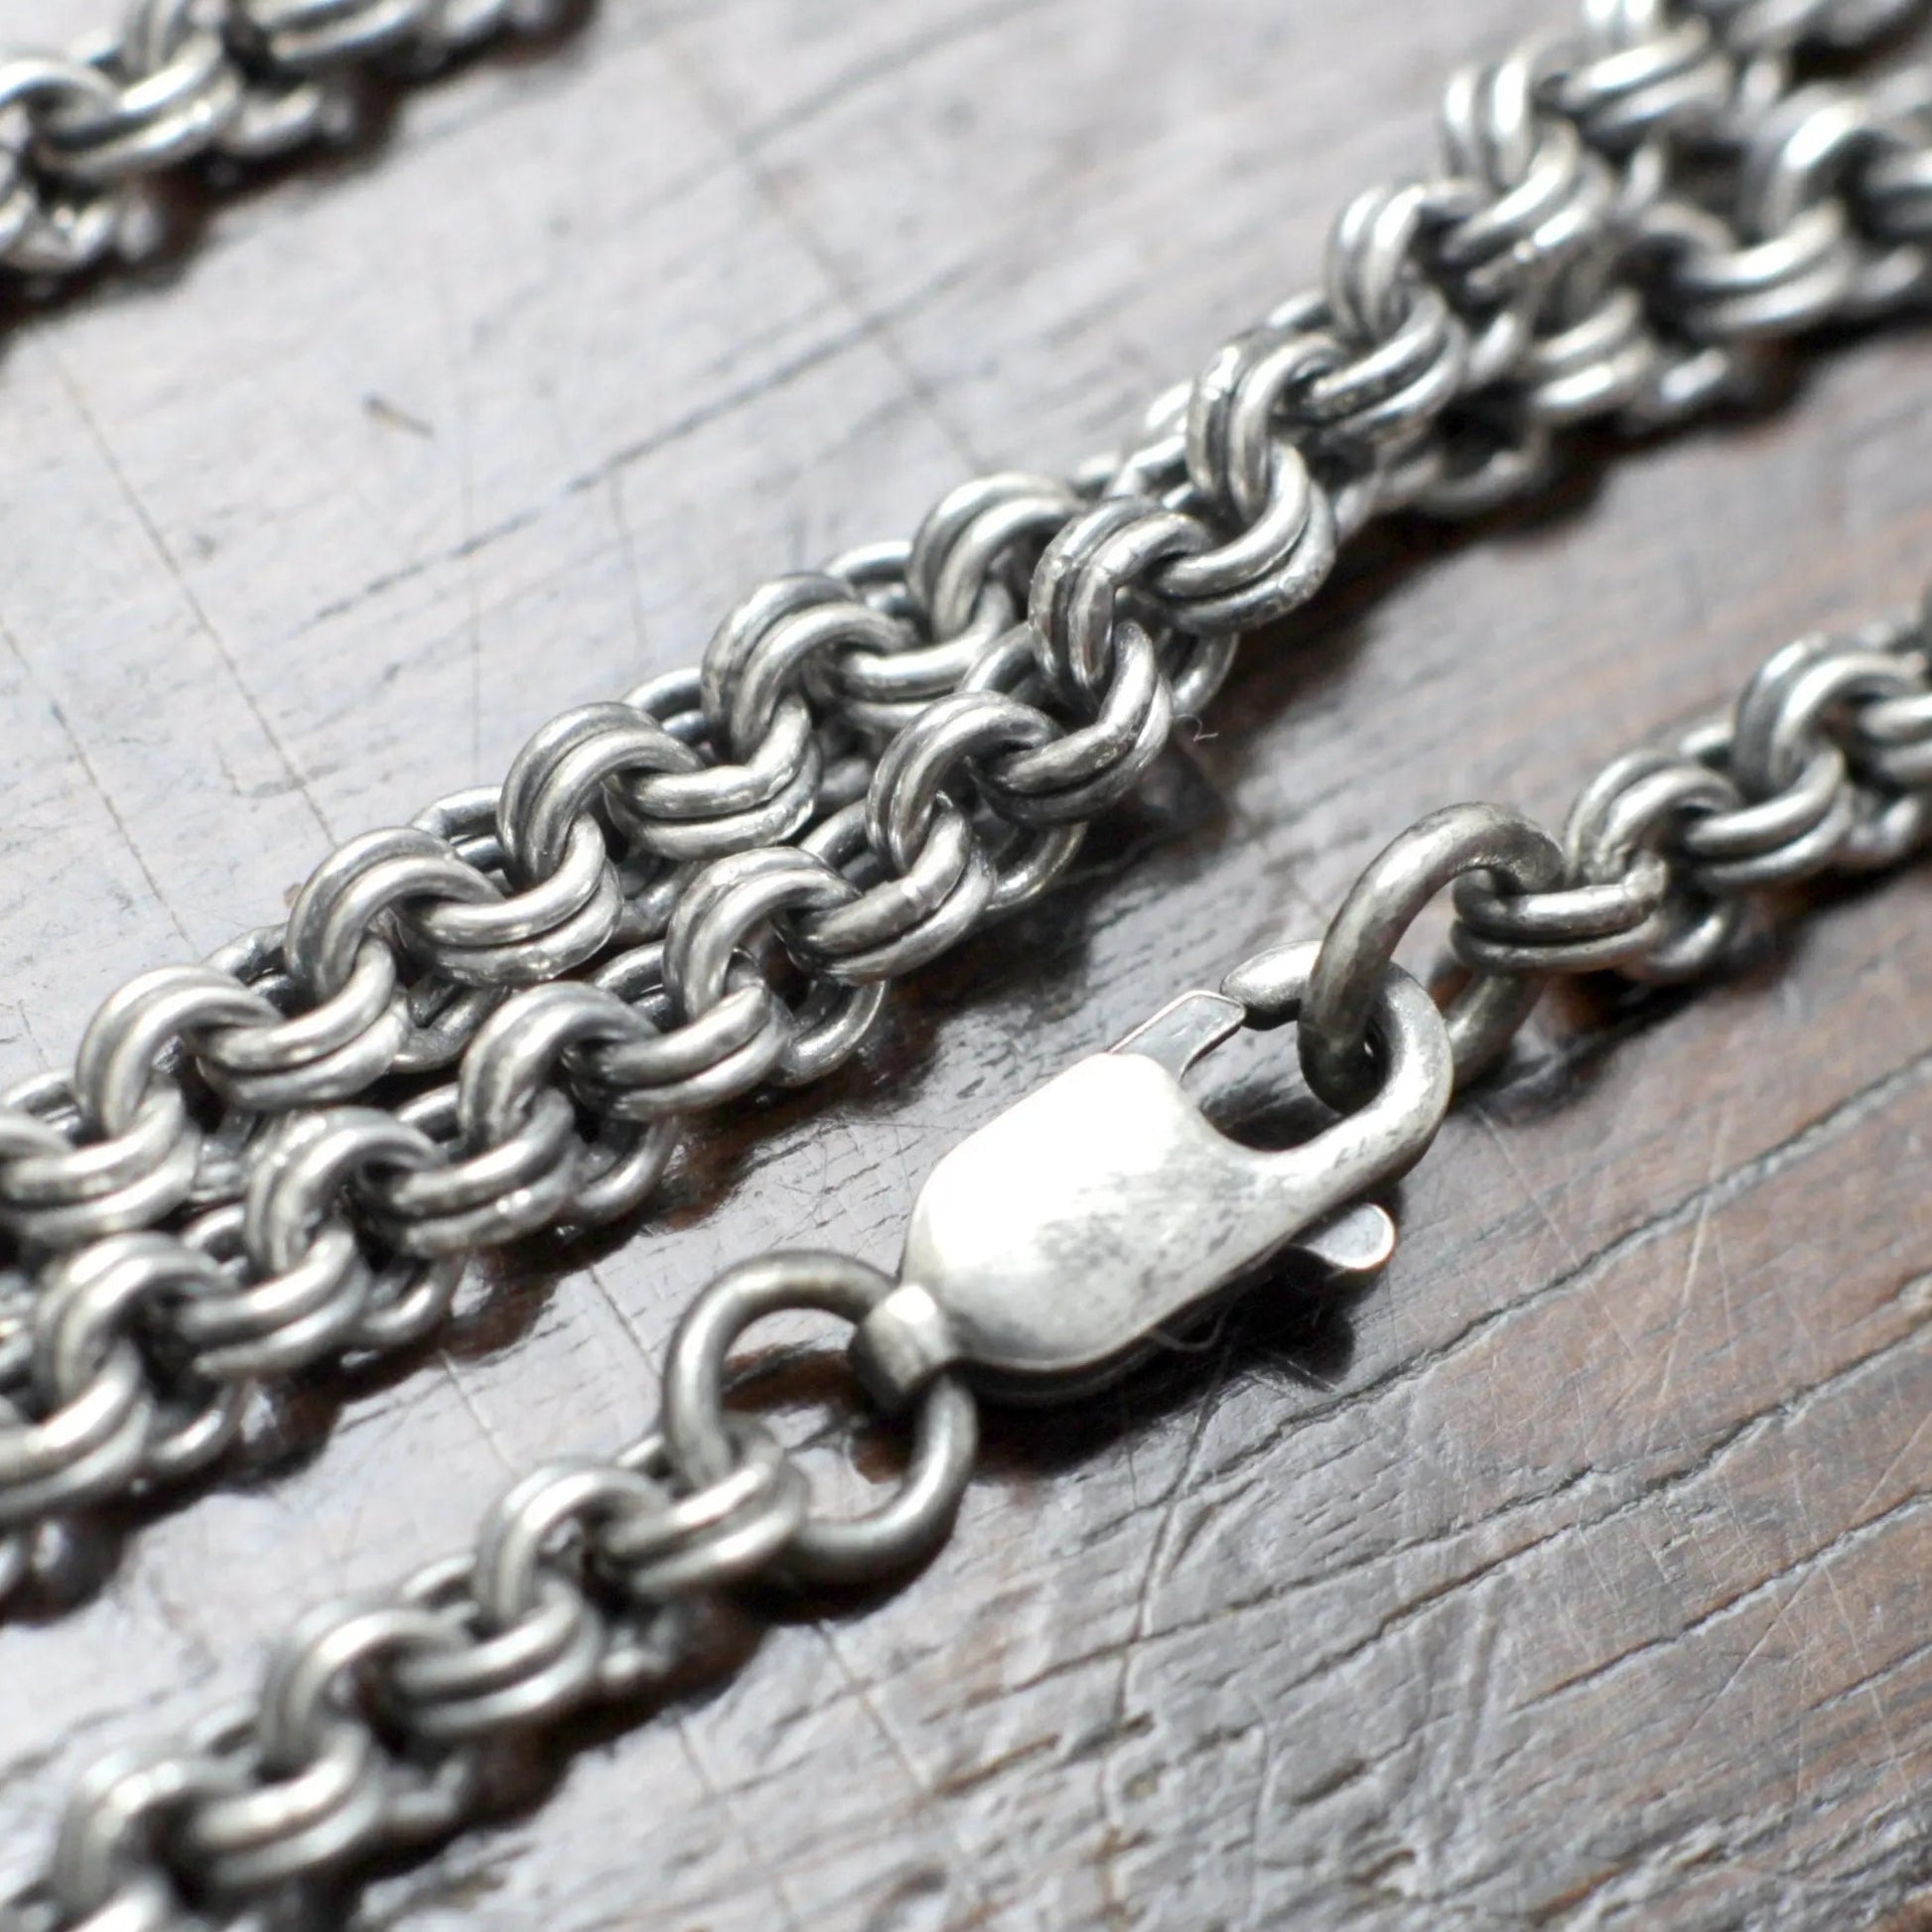 Wrought Silver Moon Necklace, a hand forged solid sterling silver, 925, crescent moon pendant on a double link chain